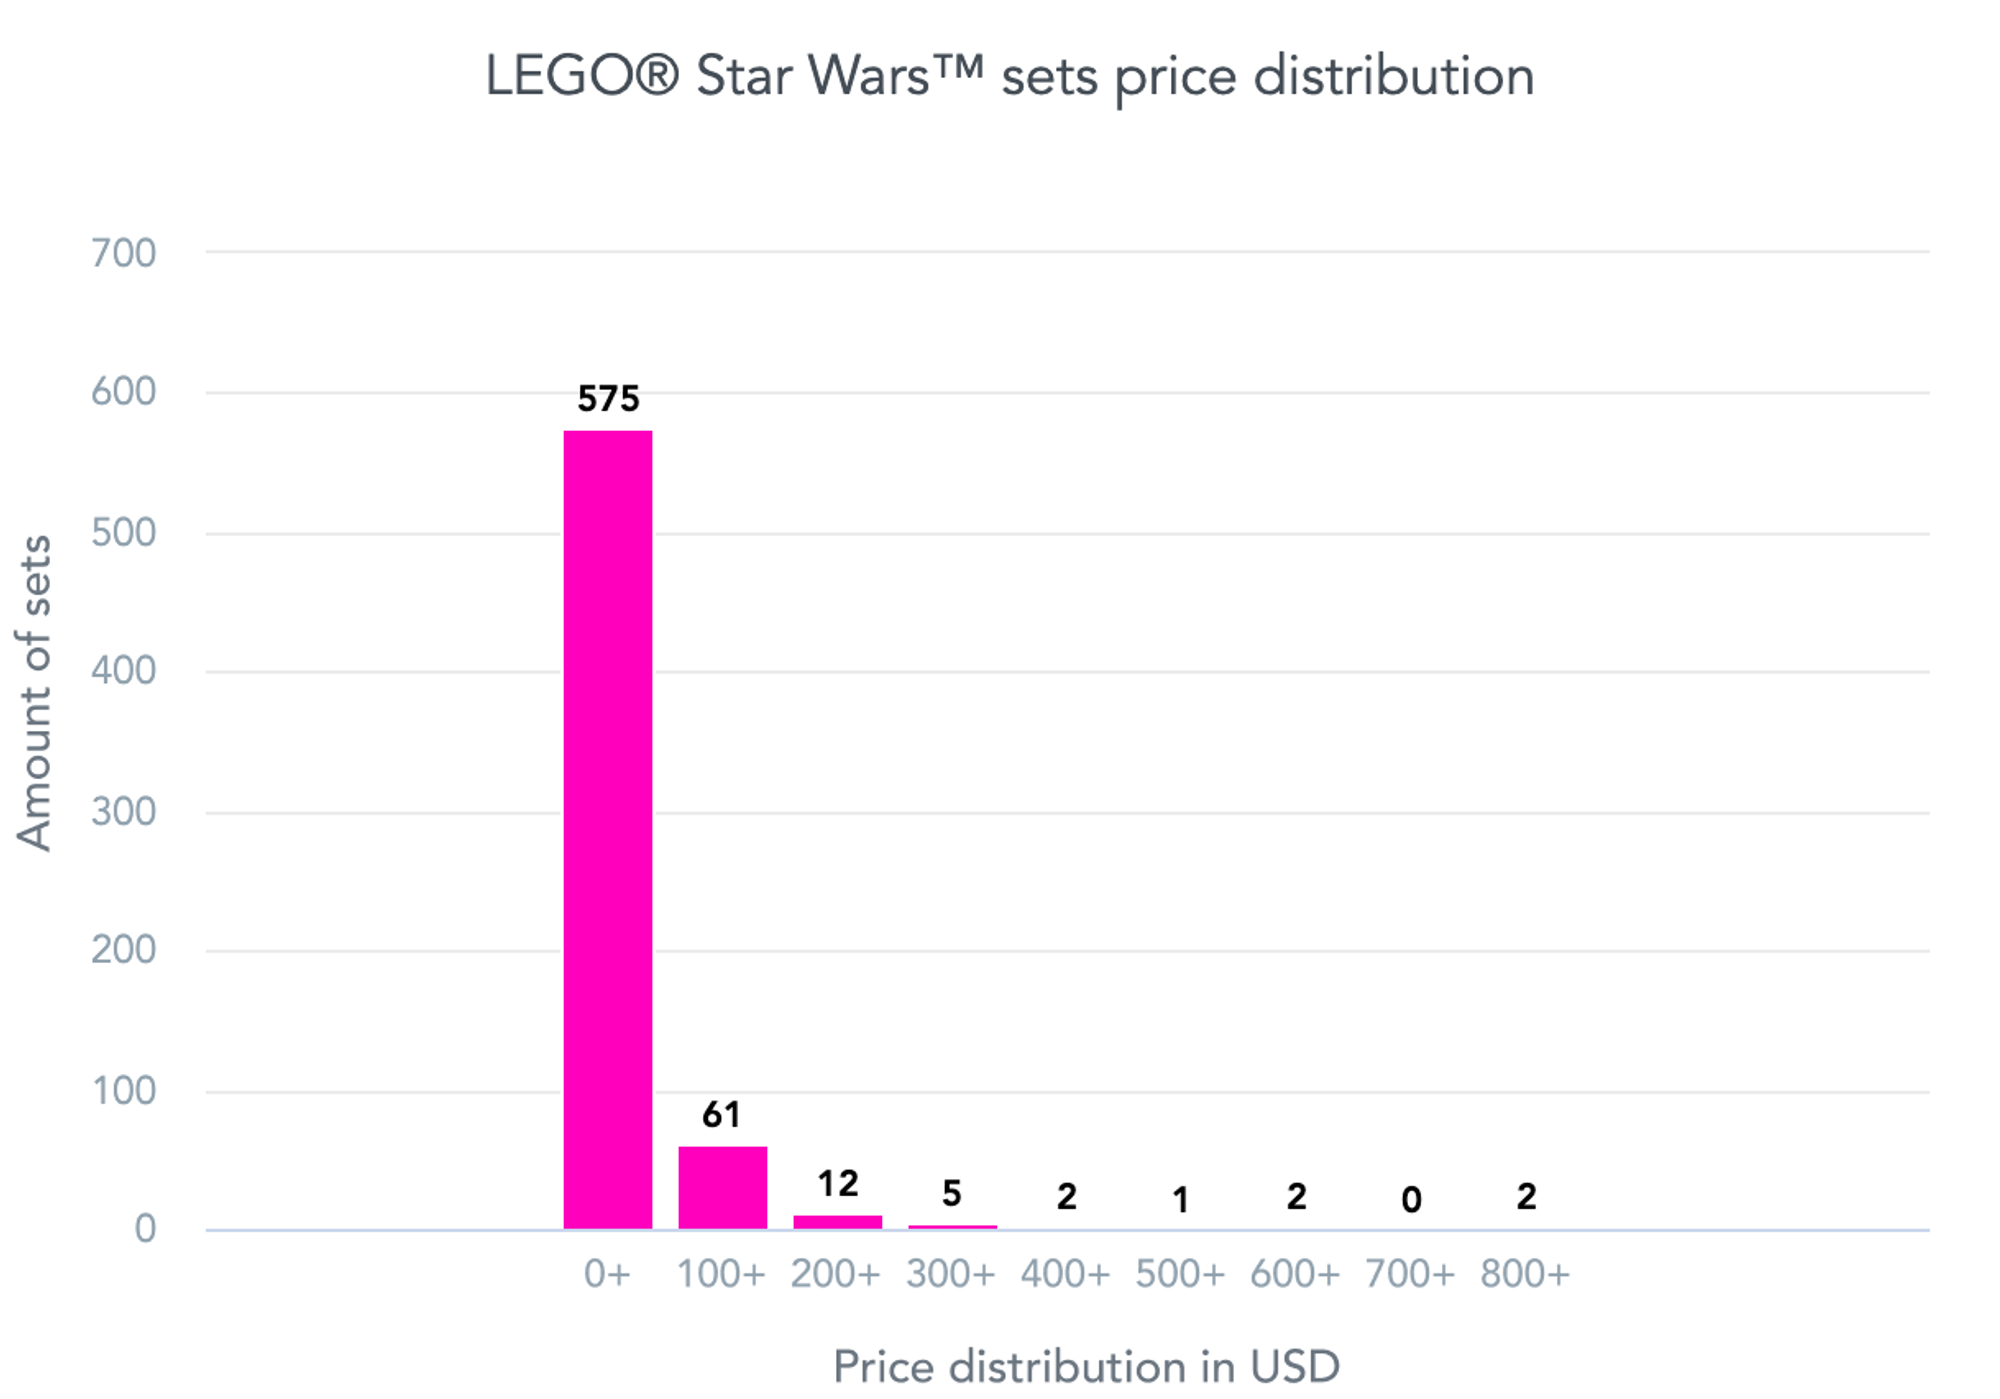 The top 10 most expensive LEGO® themes are measured by the average set price, with the Star Wars™ theme in the 8th place.